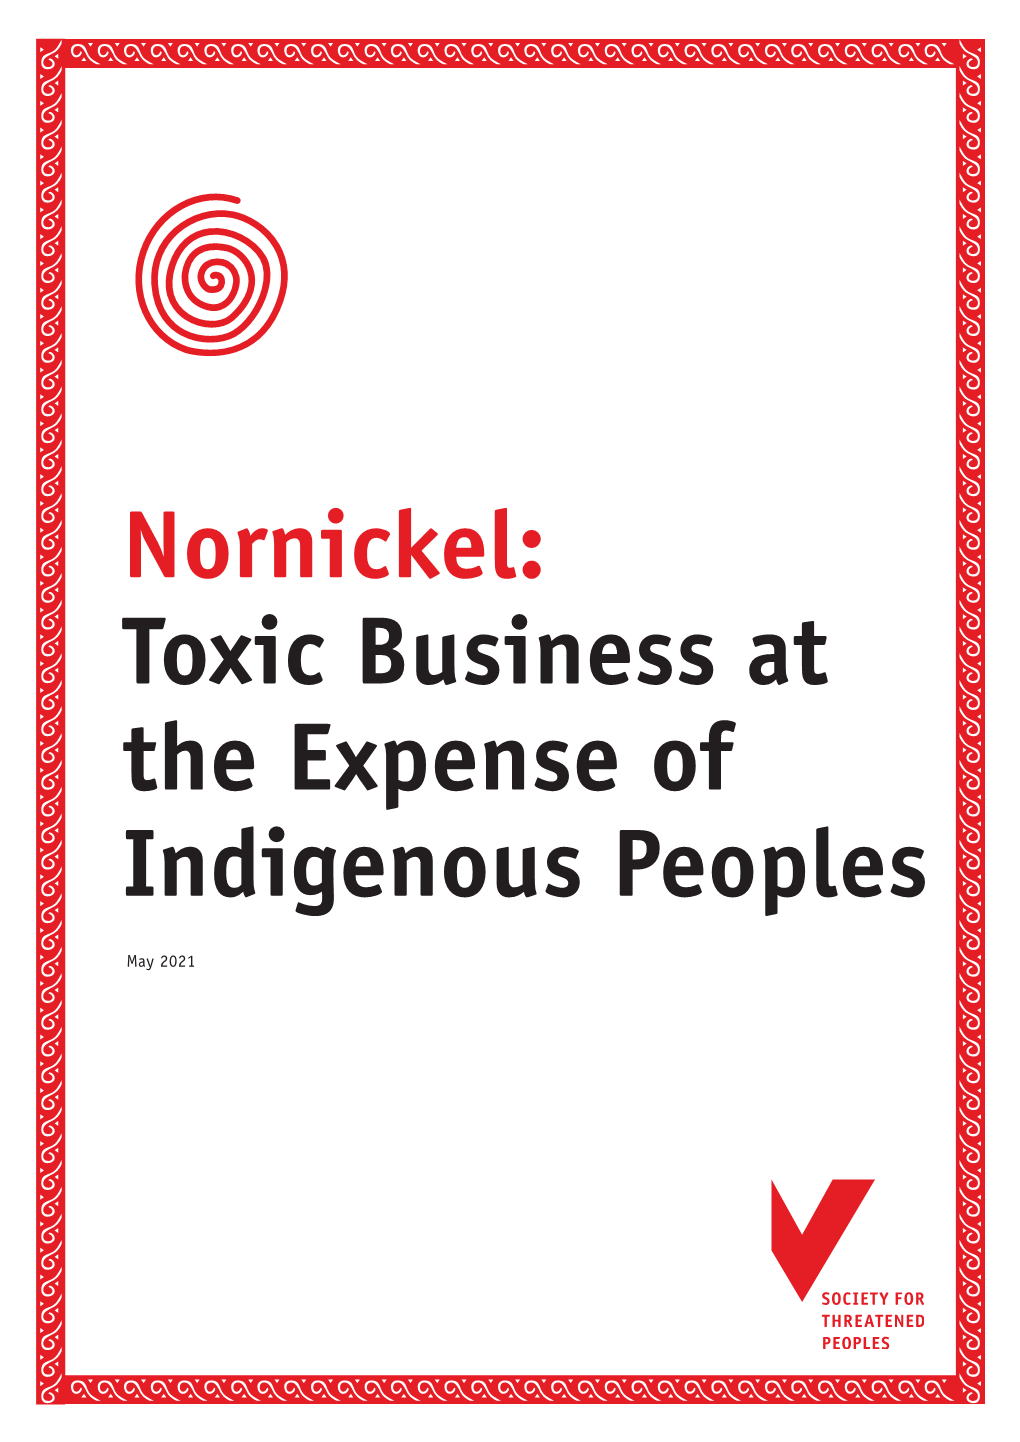 Nornickel: Toxic Business at the Expense of Indigenous Peoples